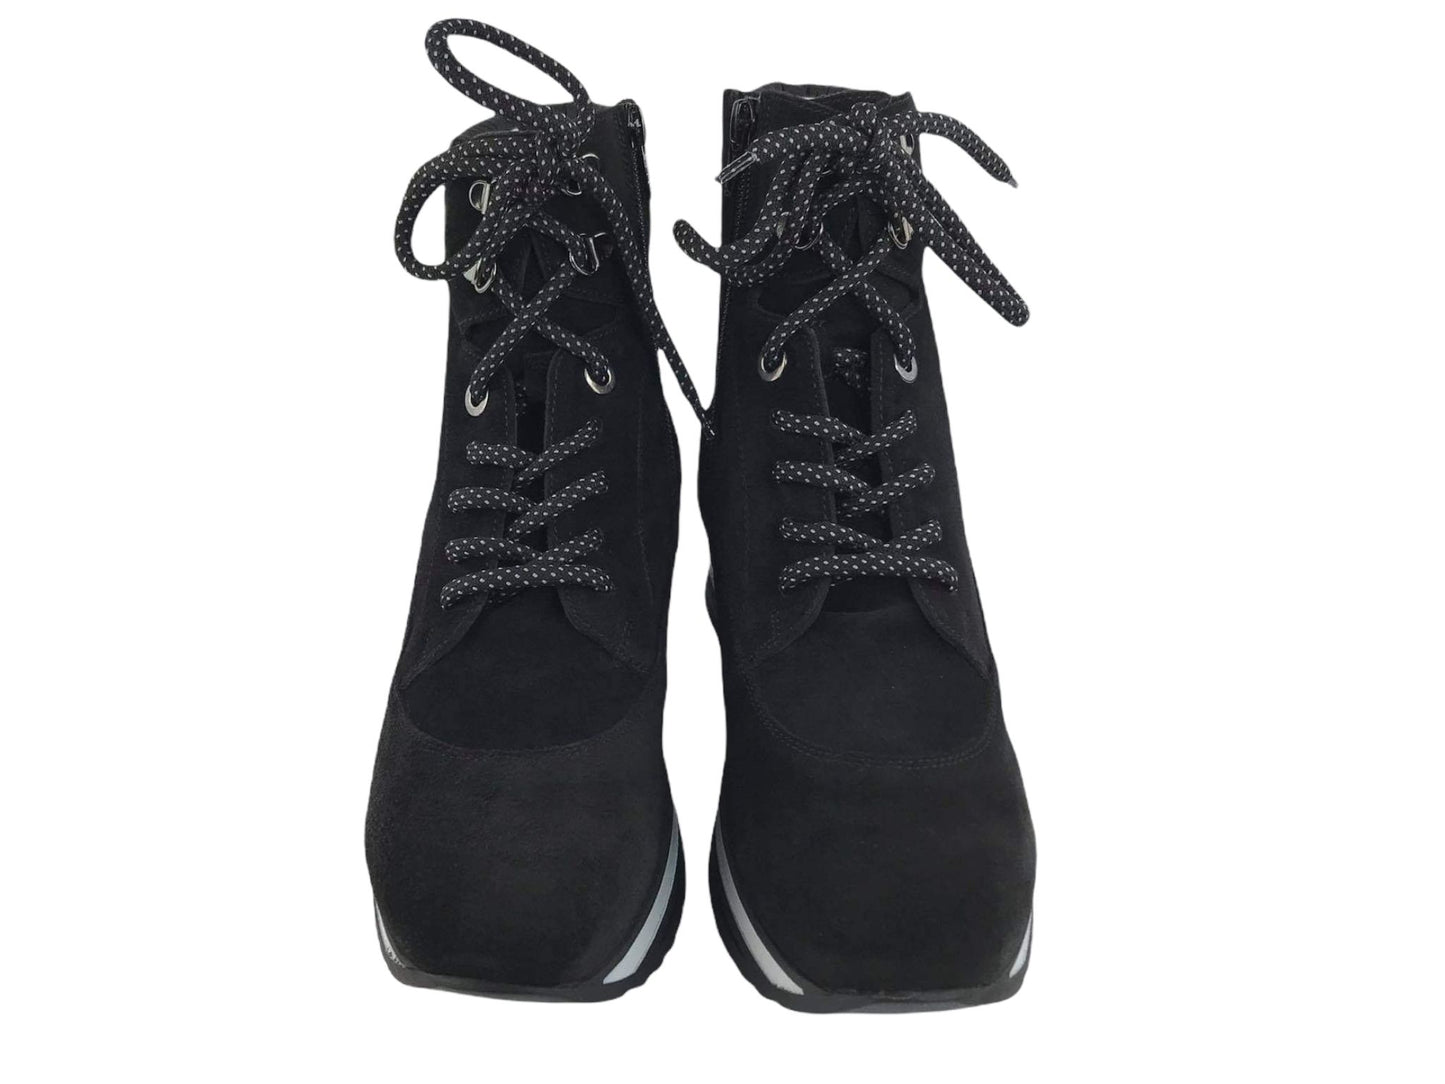 Commart | Women's lace-up and zippered wedge ankle boots in black Sira leather